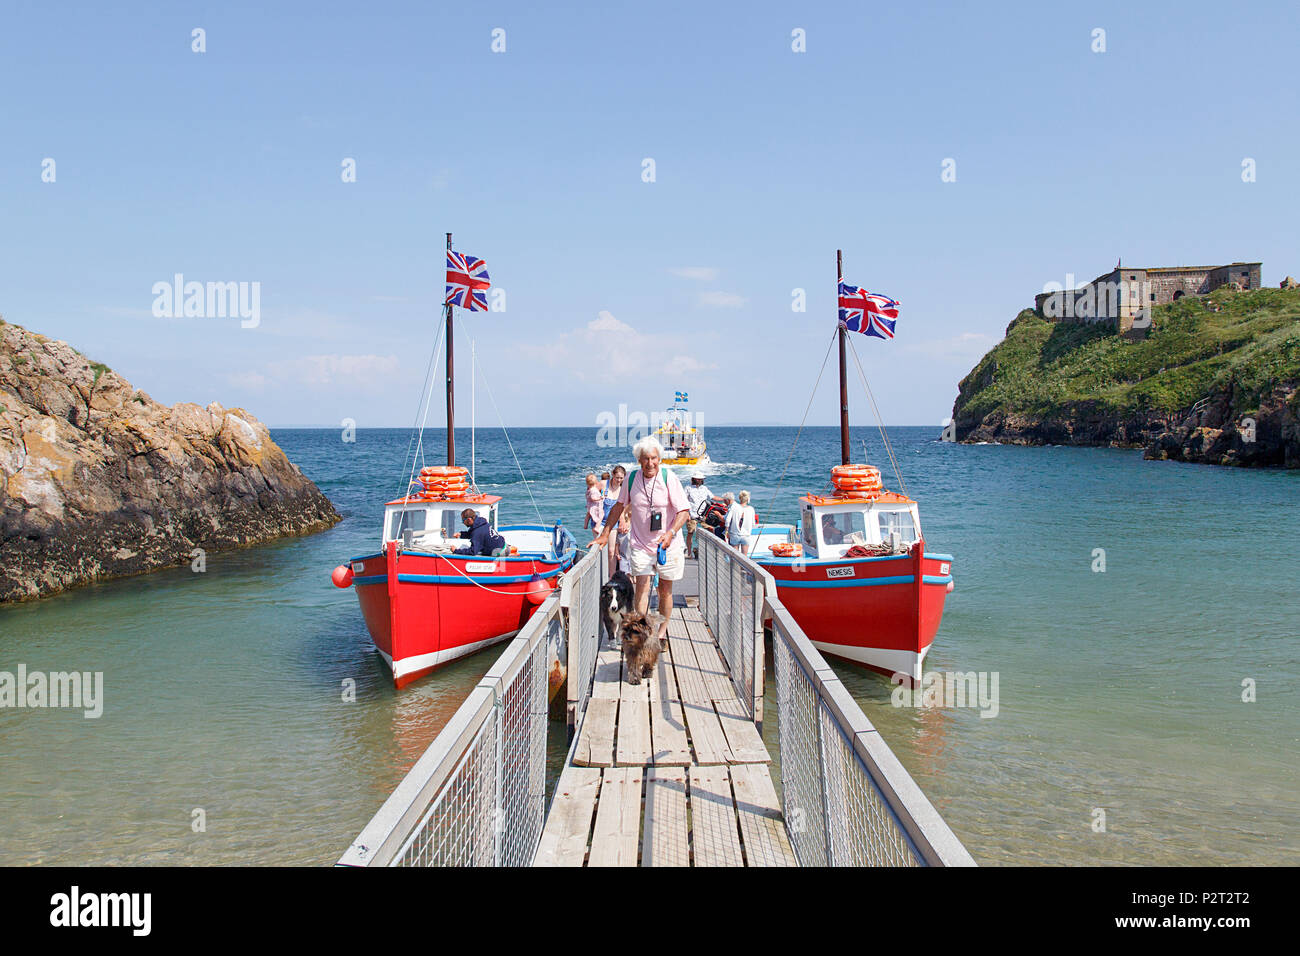 Tenby, UK: June 11, 2018: Tour boats moored at the pontoon in Tenby ready to sail to Caldey Island. Passengers disembark after visiting Holy Island. Stock Photo